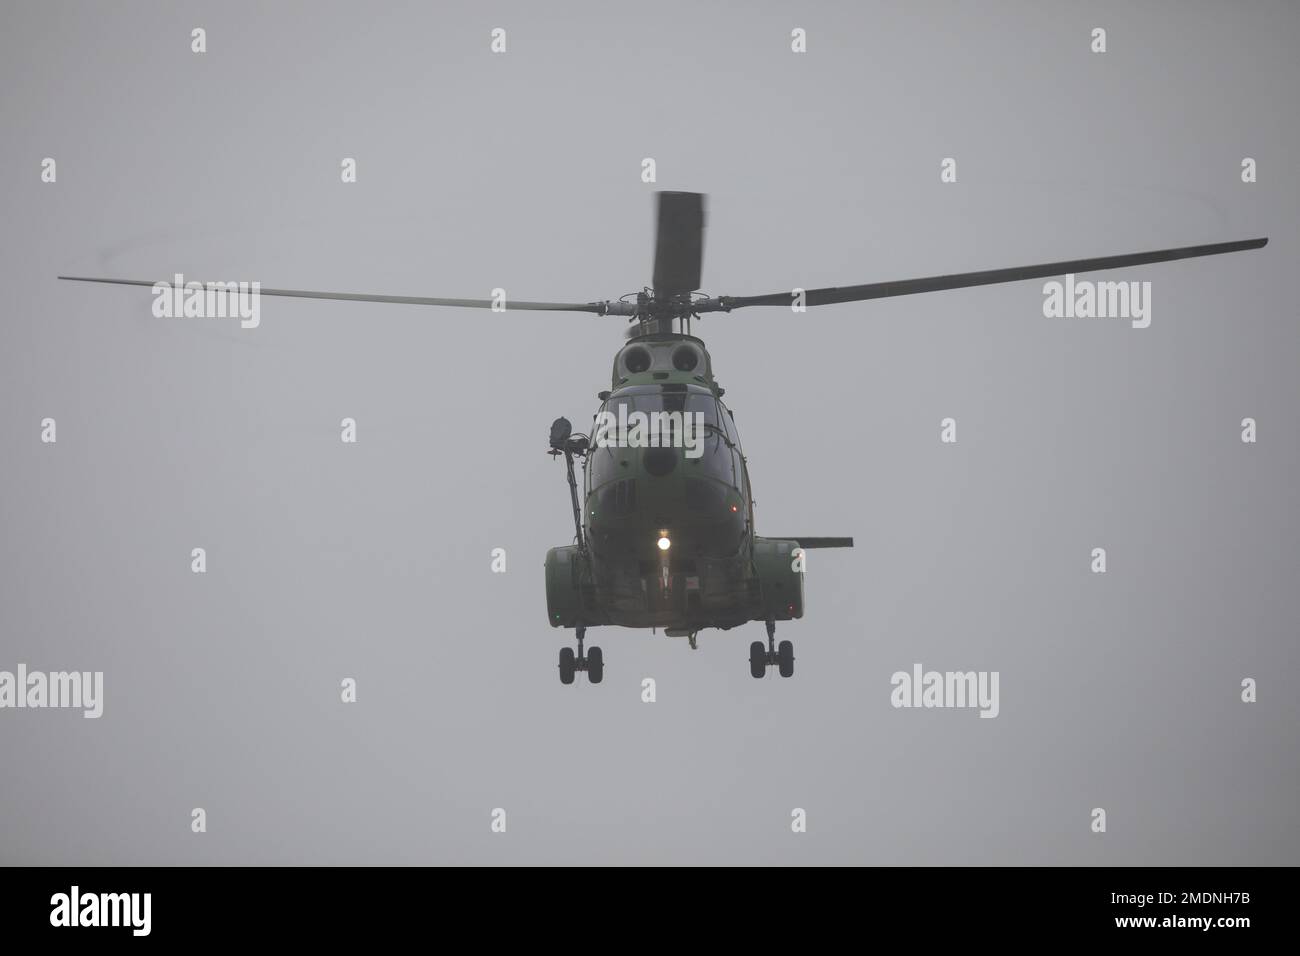 Otopeni, Romania - December 21, 2022: IAR-330 Puma military helicopter of the Romanian Air Forces in flight. Stock Photo